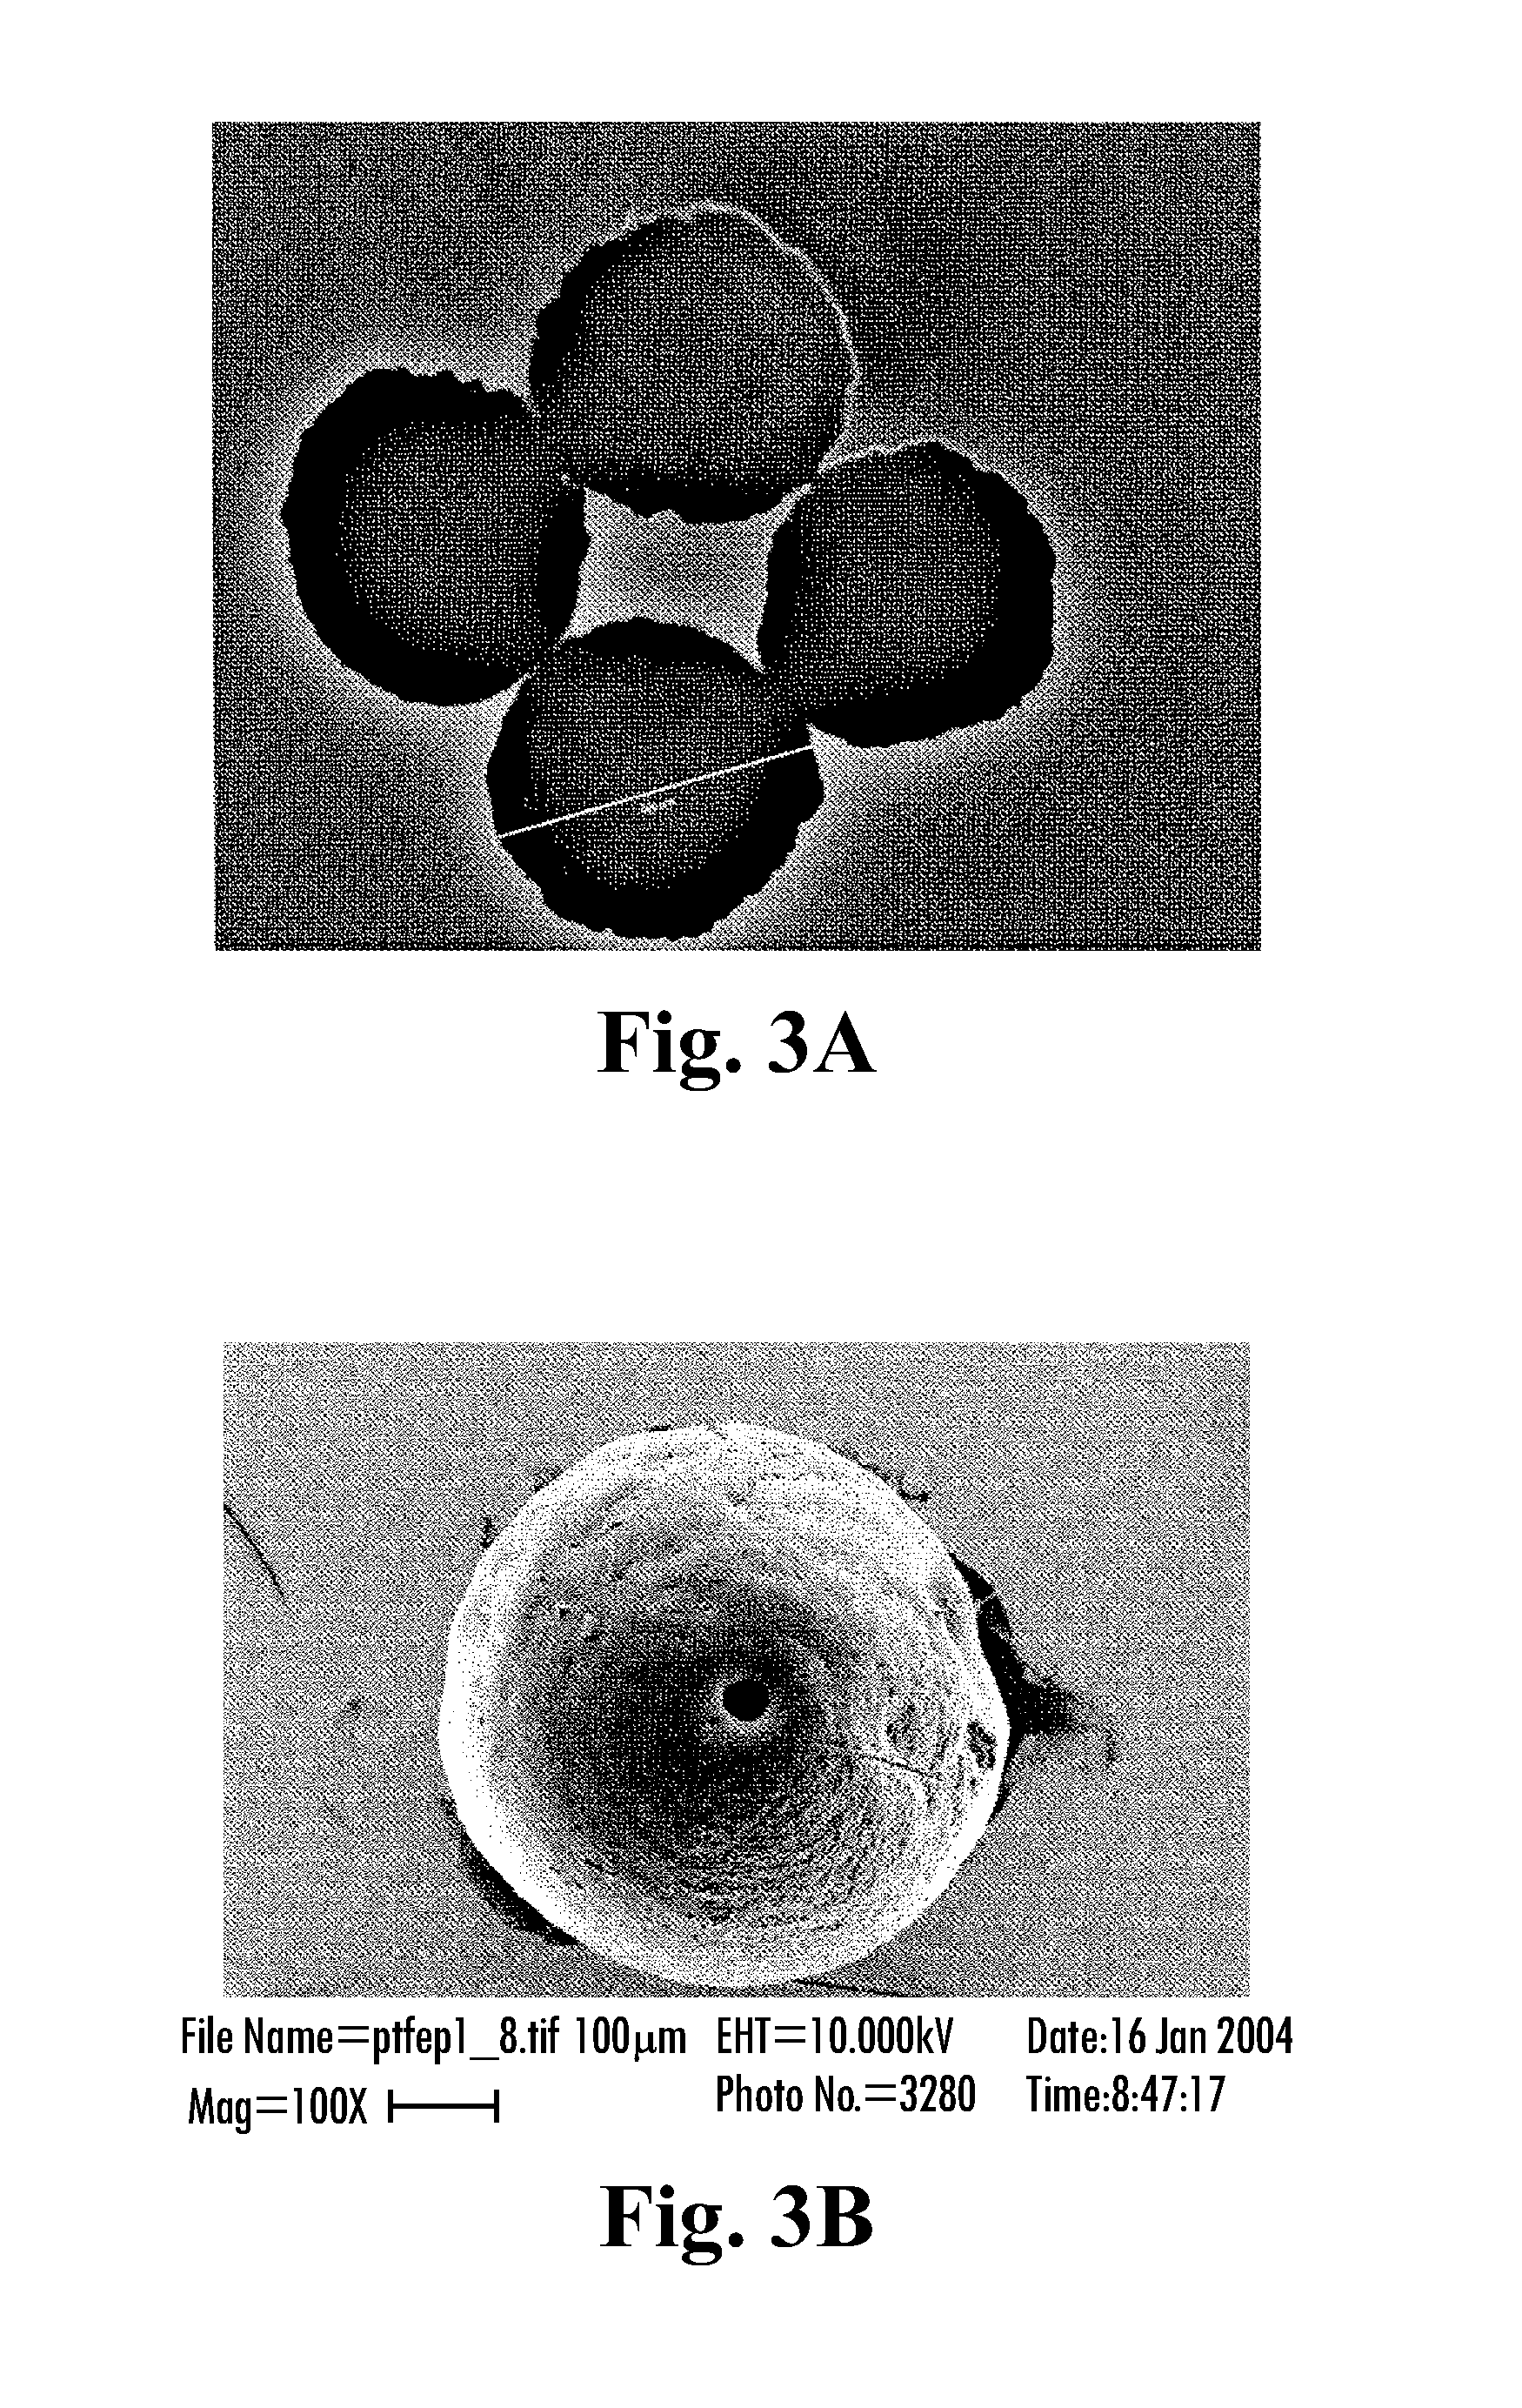 Loadable polymeric particles for enhanced imaging in clinical applications and methods of preparing and using the same